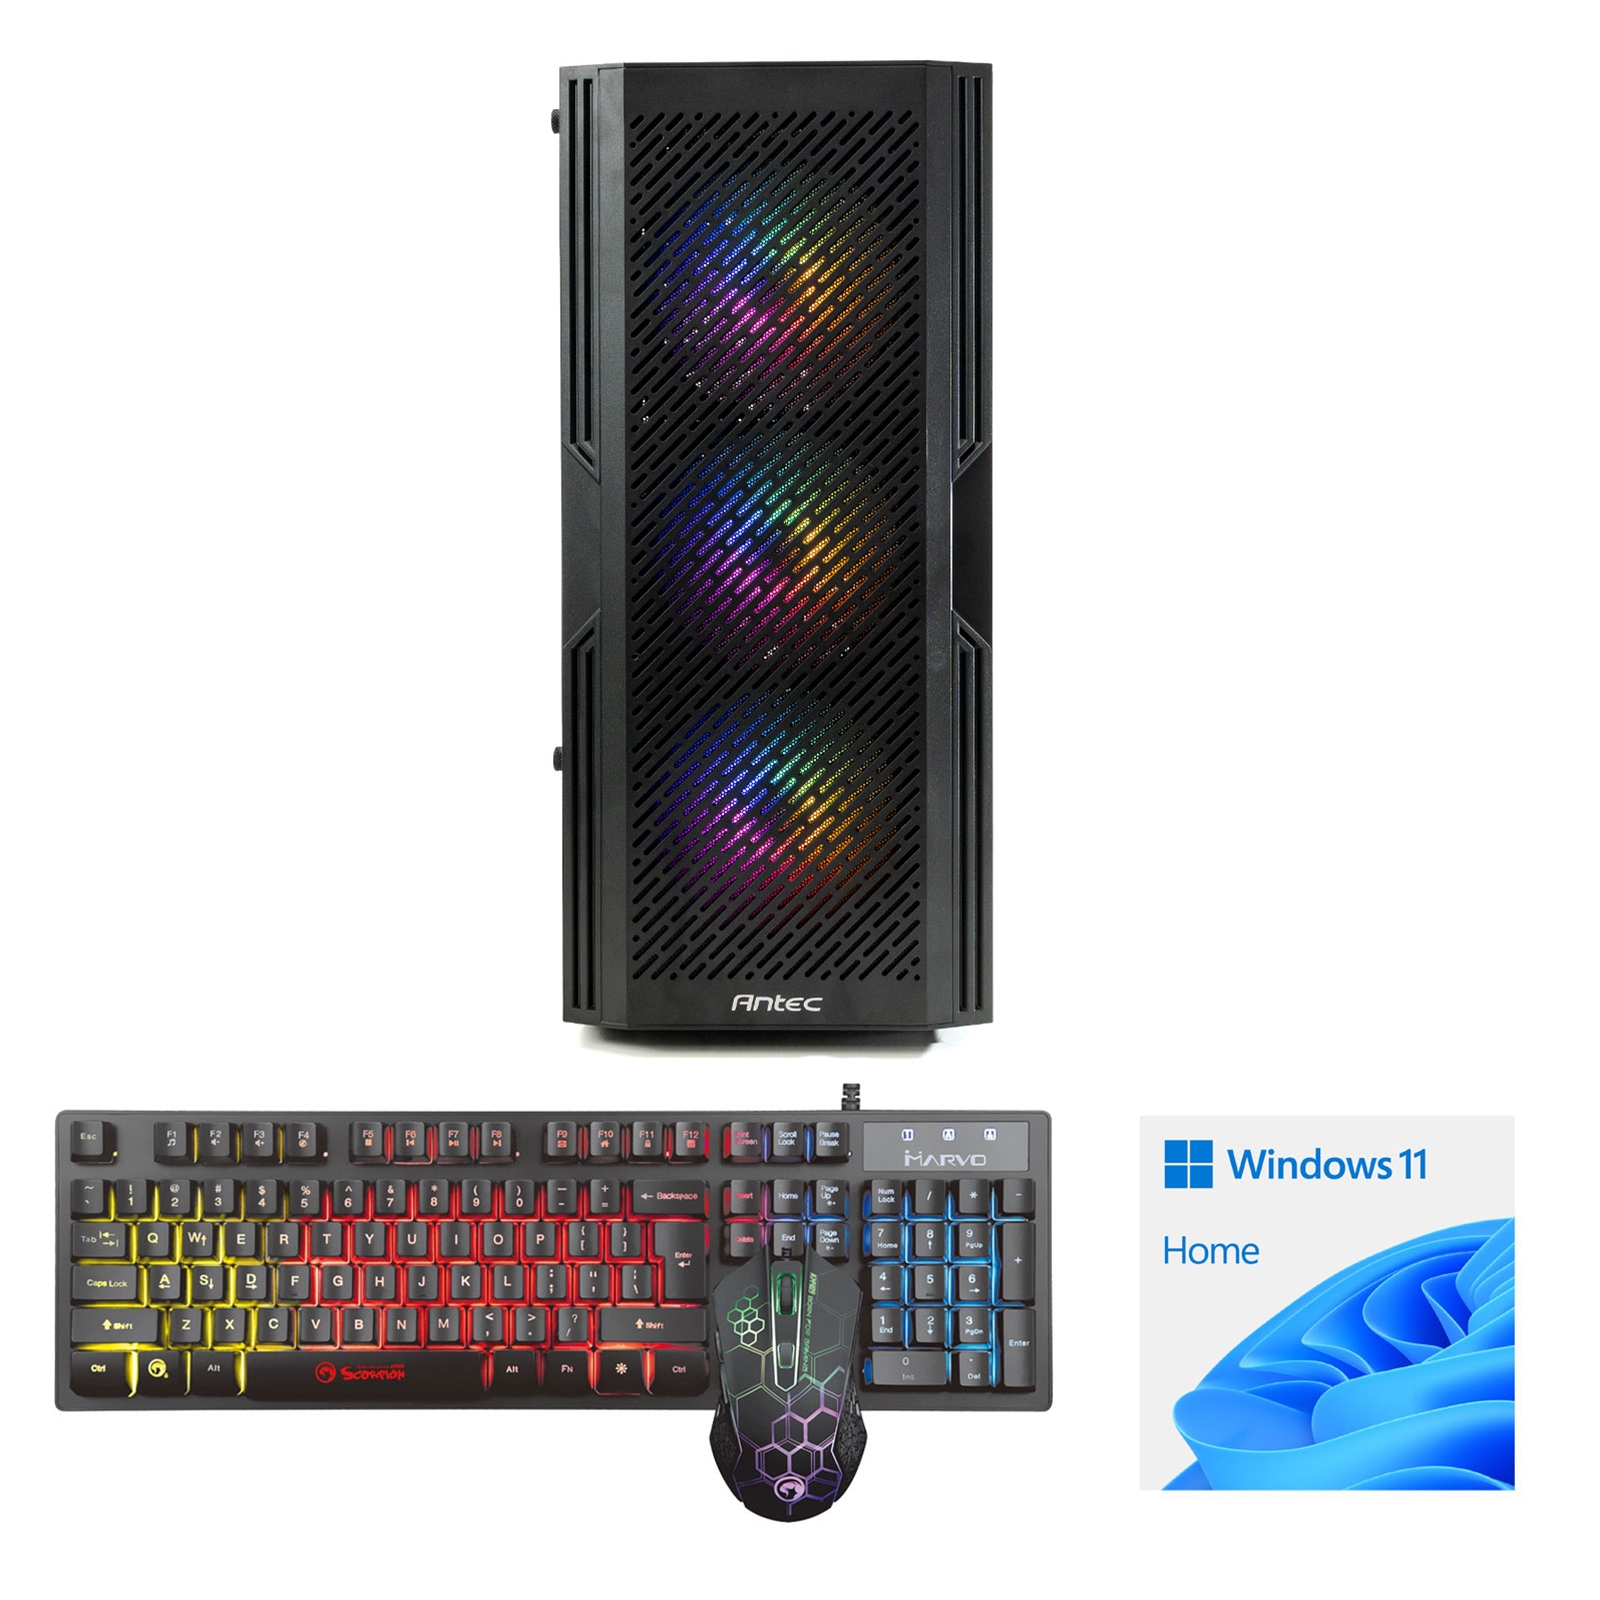 LOGIX Intel i5-10400F 6 Core 12 Threads, 2.90GHz (4.30GHz Boost), 16GB DDR4 RAM, 1TB NVMe M.2, 80 Cert PSU, GTX1650 4GB Graphics, Windows 11 home installed + FREE Keyboard & Mouse - Prebuilt System - Full 3-Year Parts & Collection Warranty